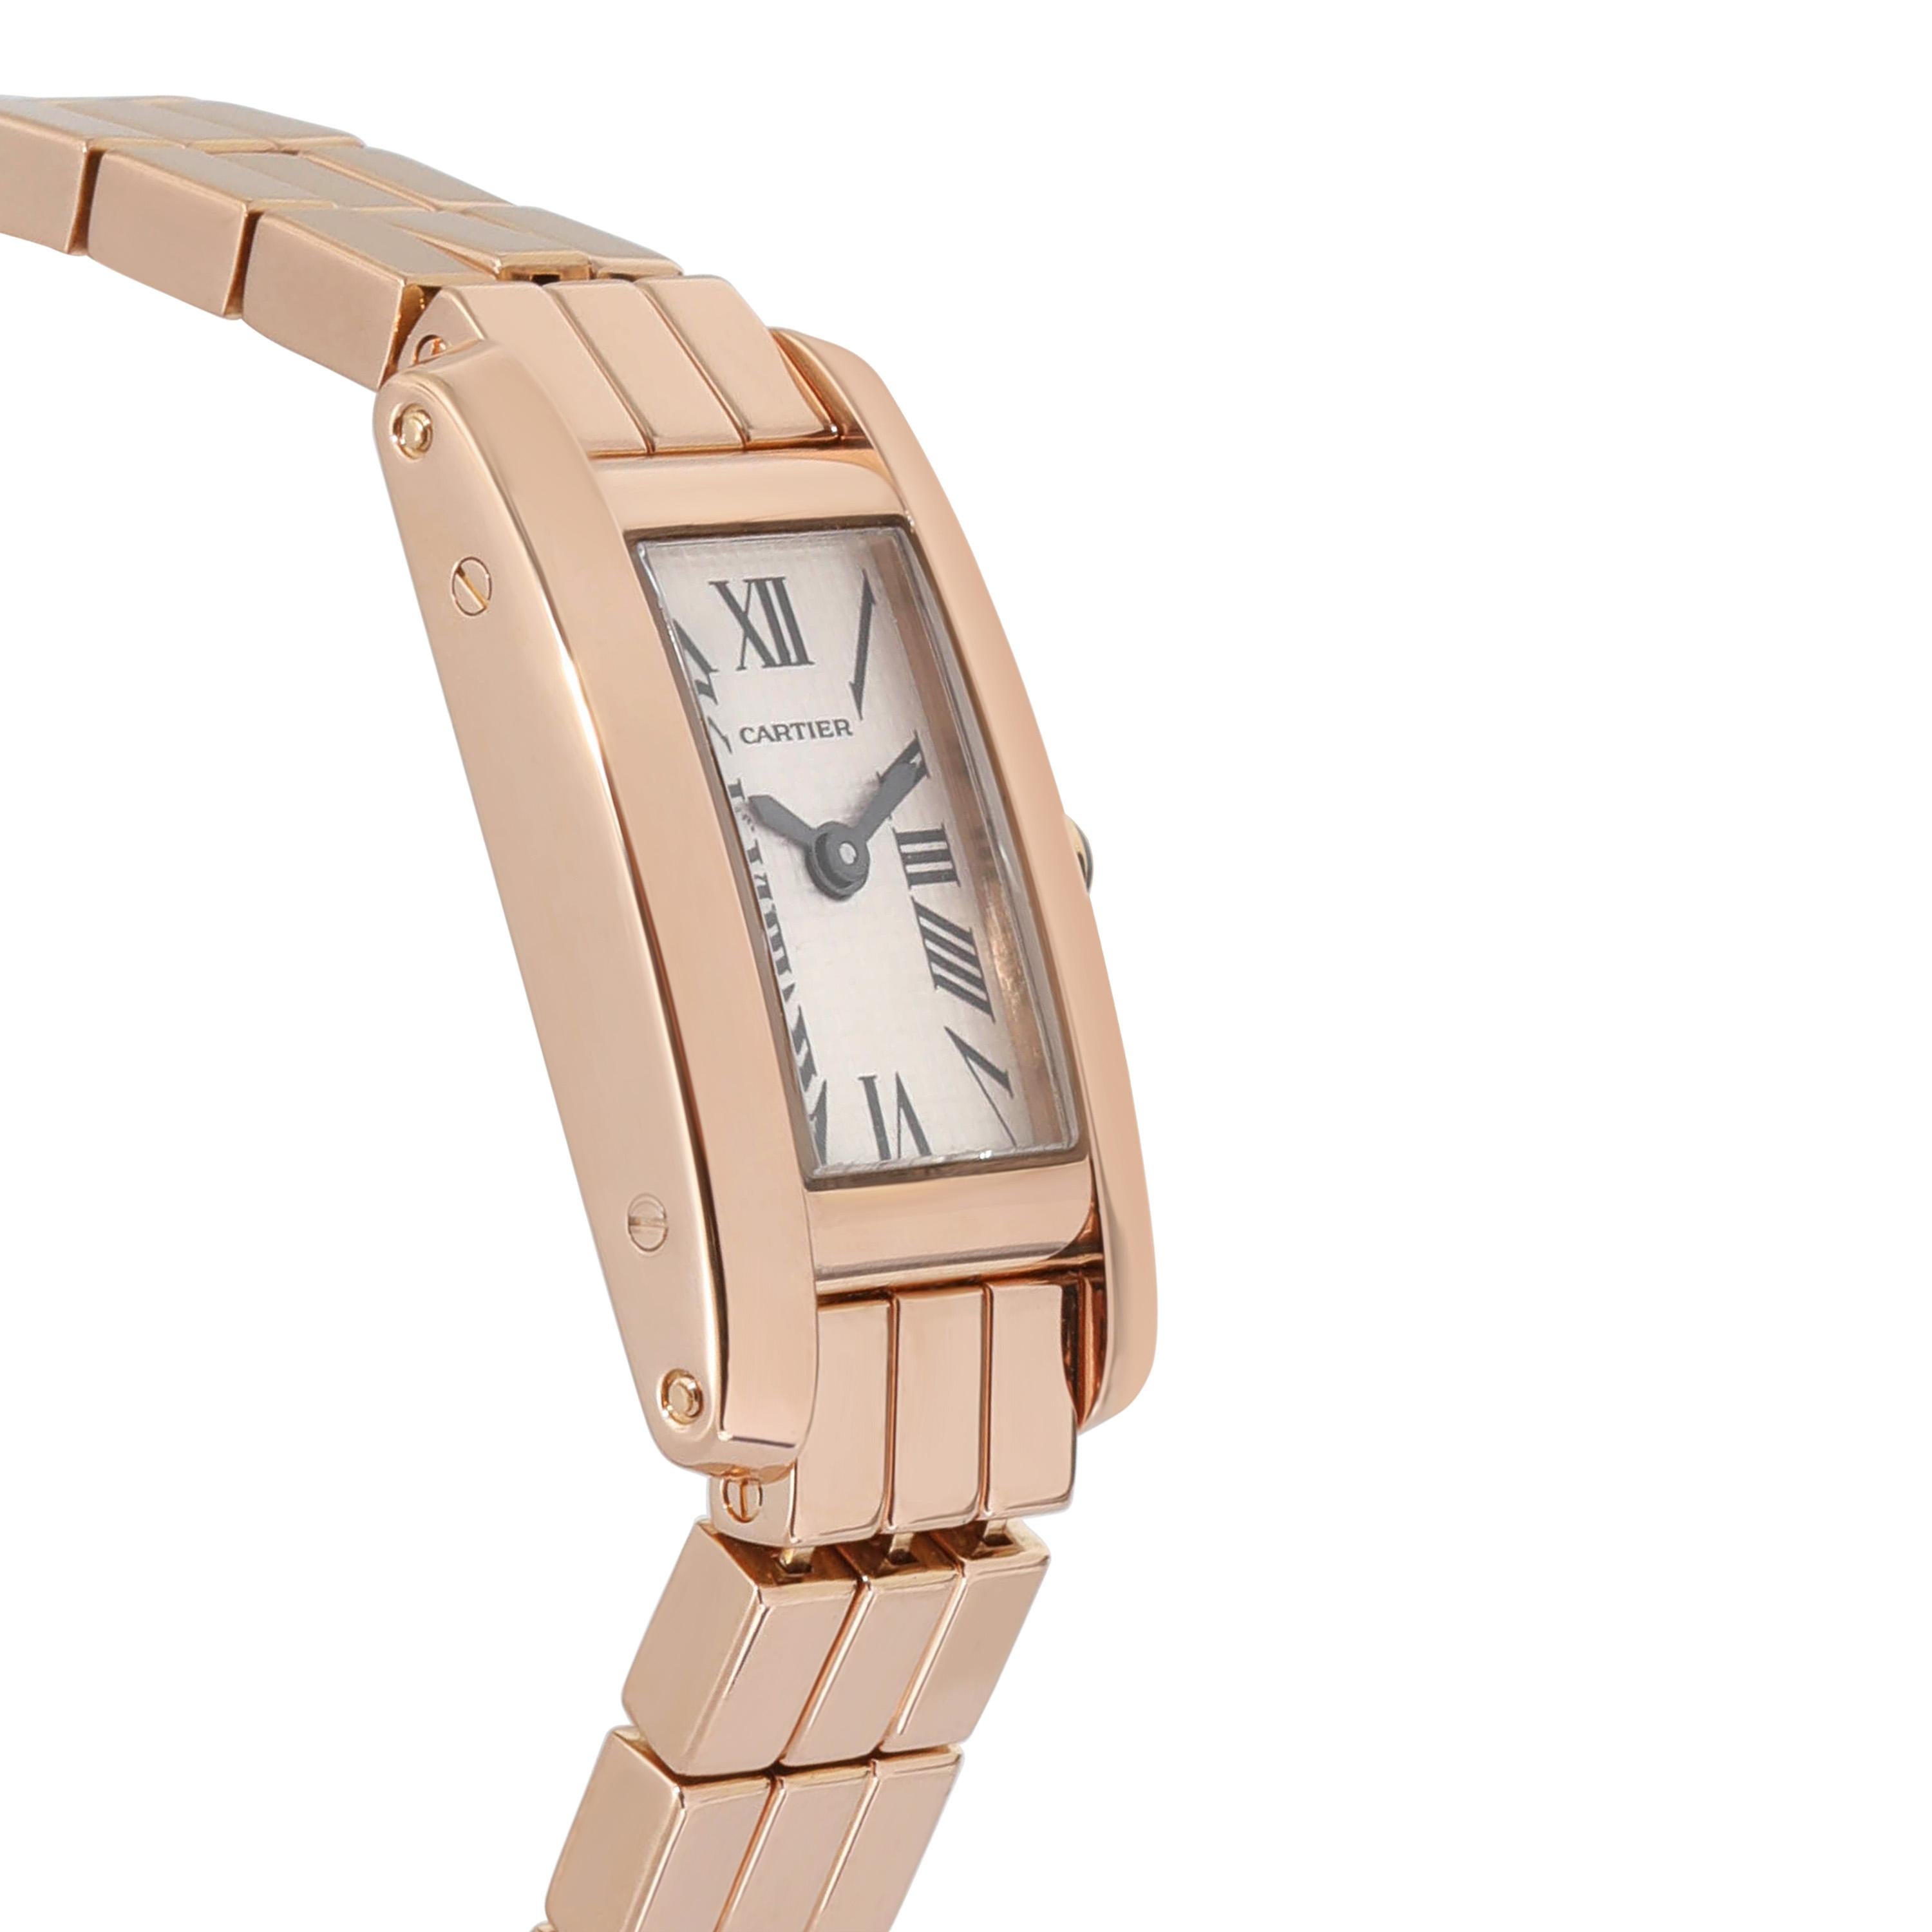 Cartier Tank Allongee Laniere W15373X5 Women's Watch in 18kt Rose Gold

SKU: 131610

PRIMARY DETAILS
Brand: Cartier
Model: Tank Allongee Laniere
Country of Origin: Switzerland
Movement Type: Quartz: Battery
Year of Manufacture: 2000-2009
Condition: